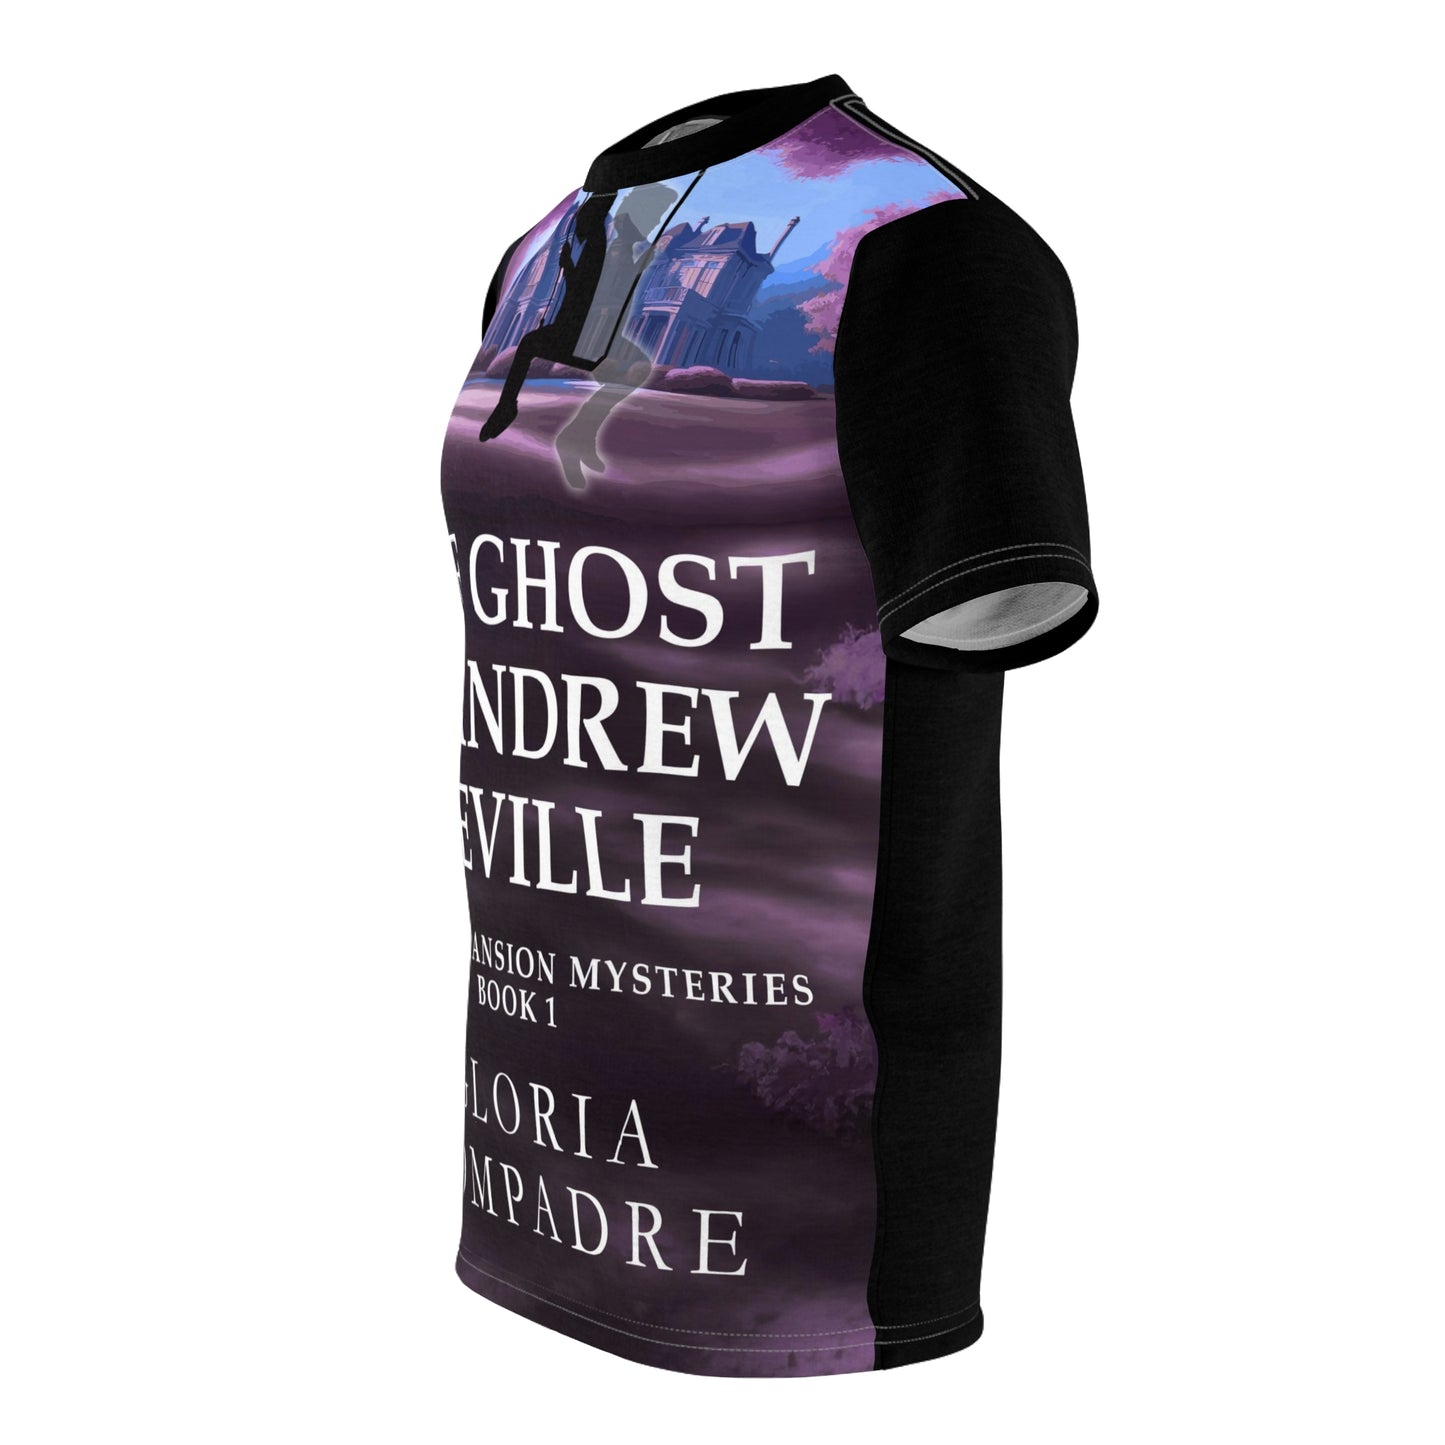 The Ghost of Andrew Neville - Unisex All-Over Print Cut & Sew T-Shirt